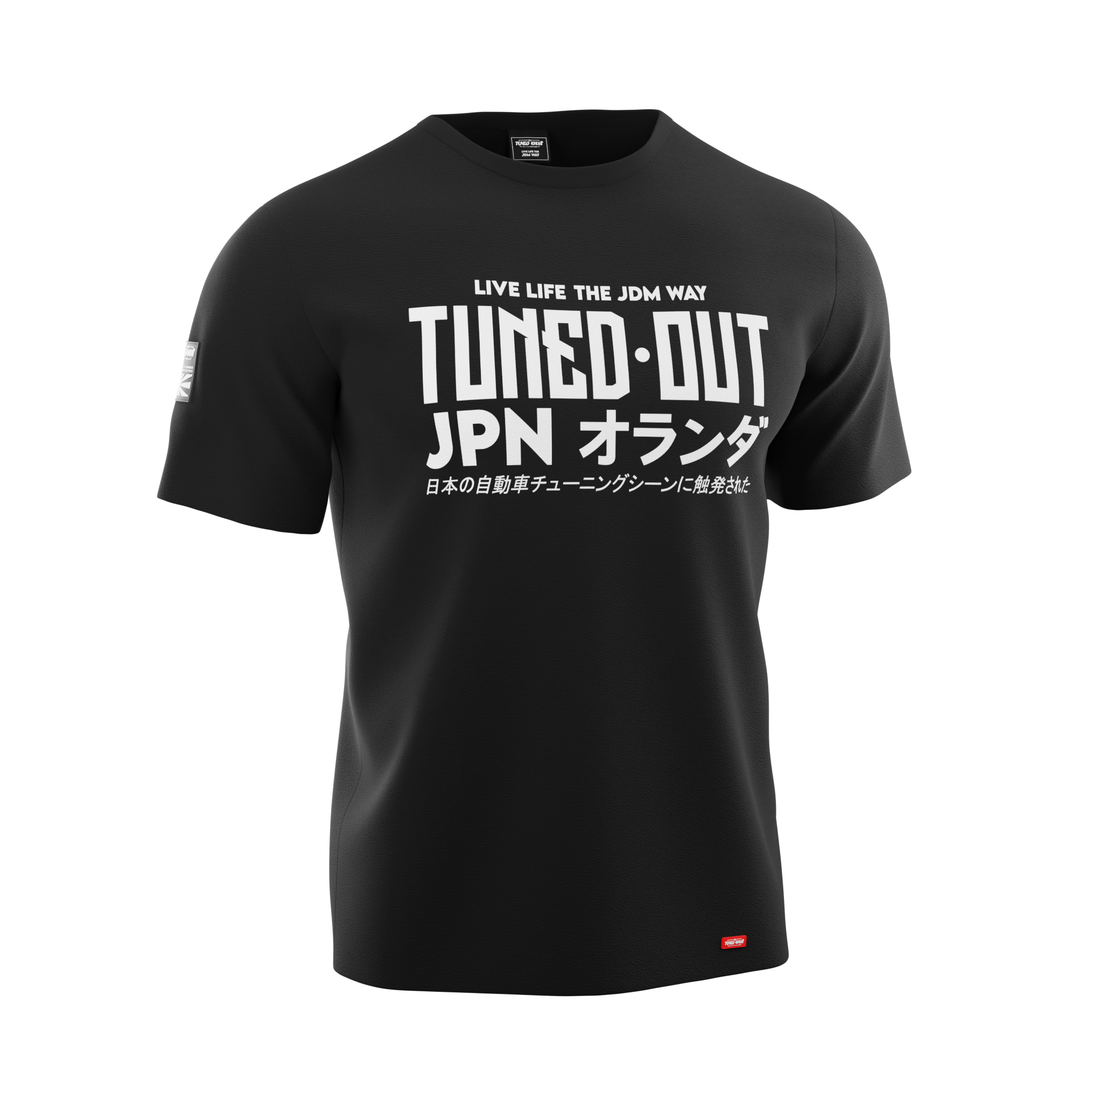 Tuned-Out white on black T-Shirt